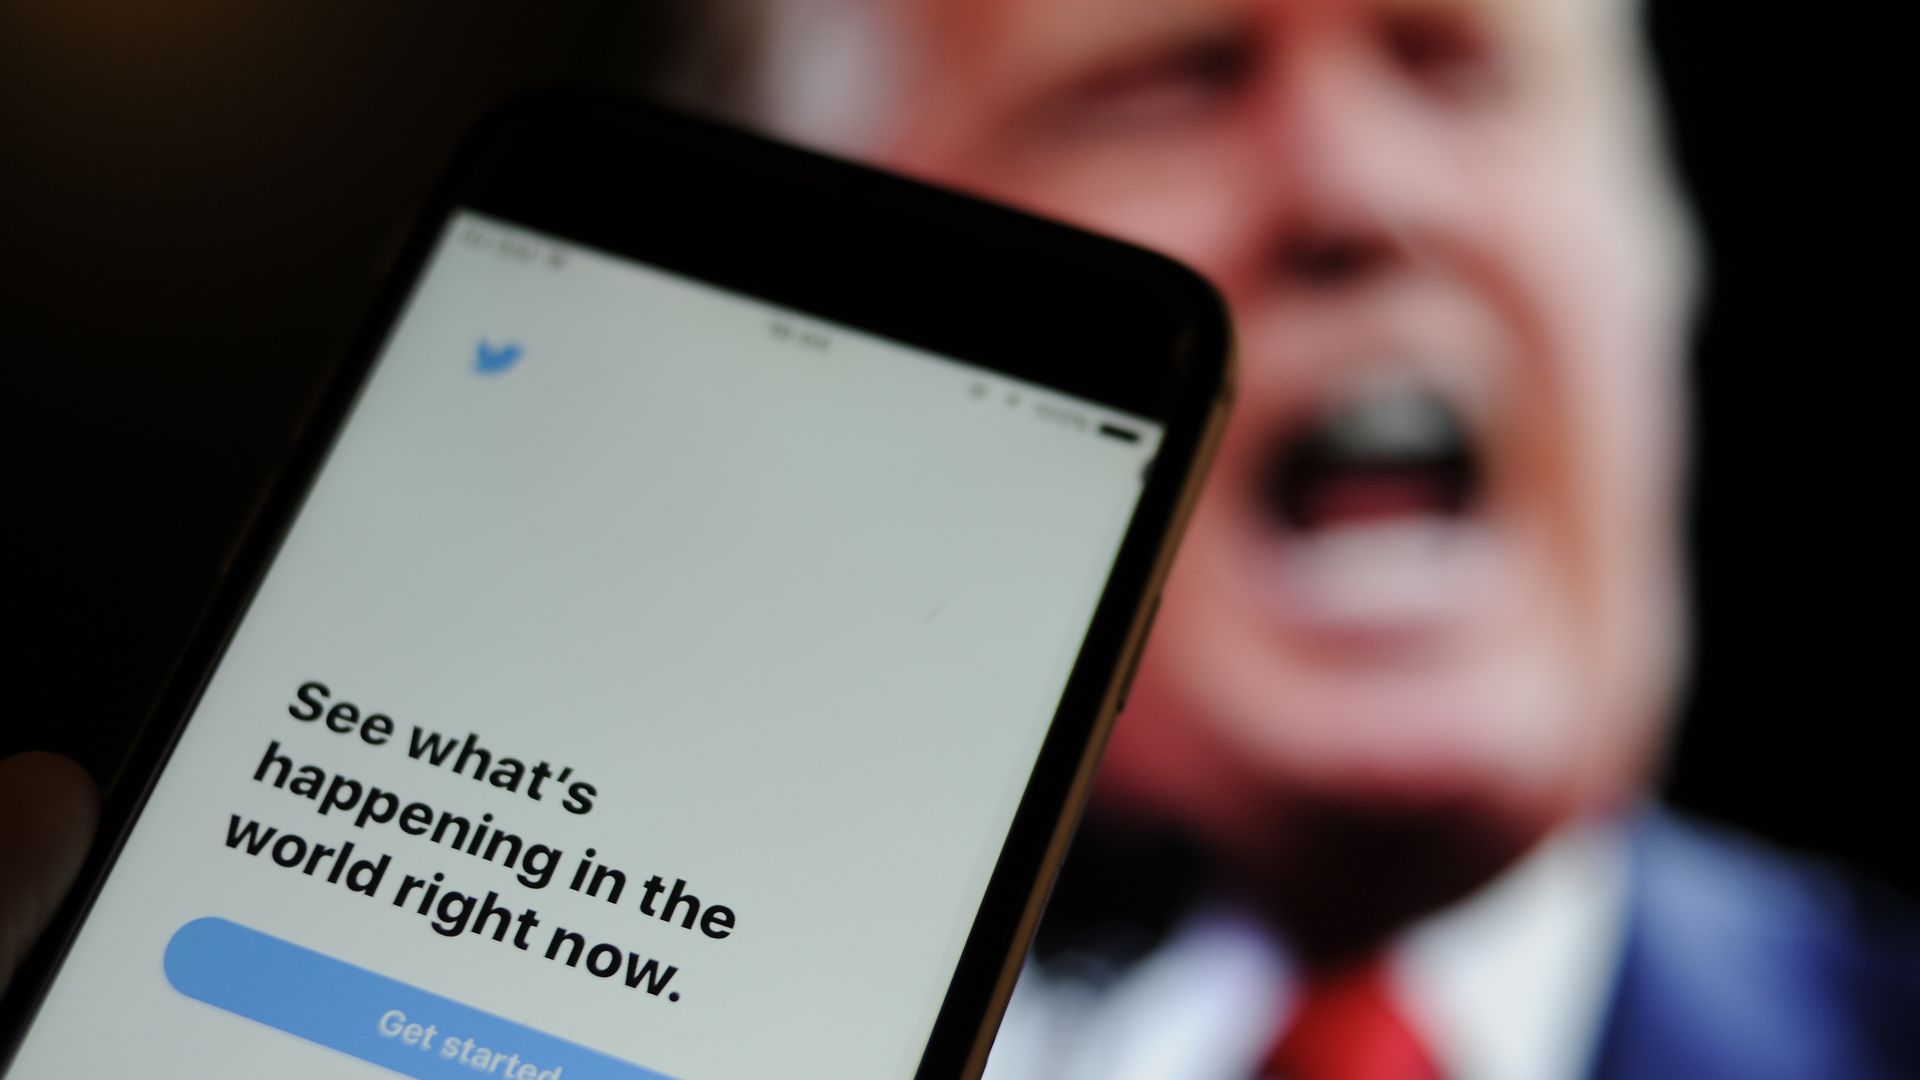 The Twitter app is seen with an image of US president Donald Trump in the background.